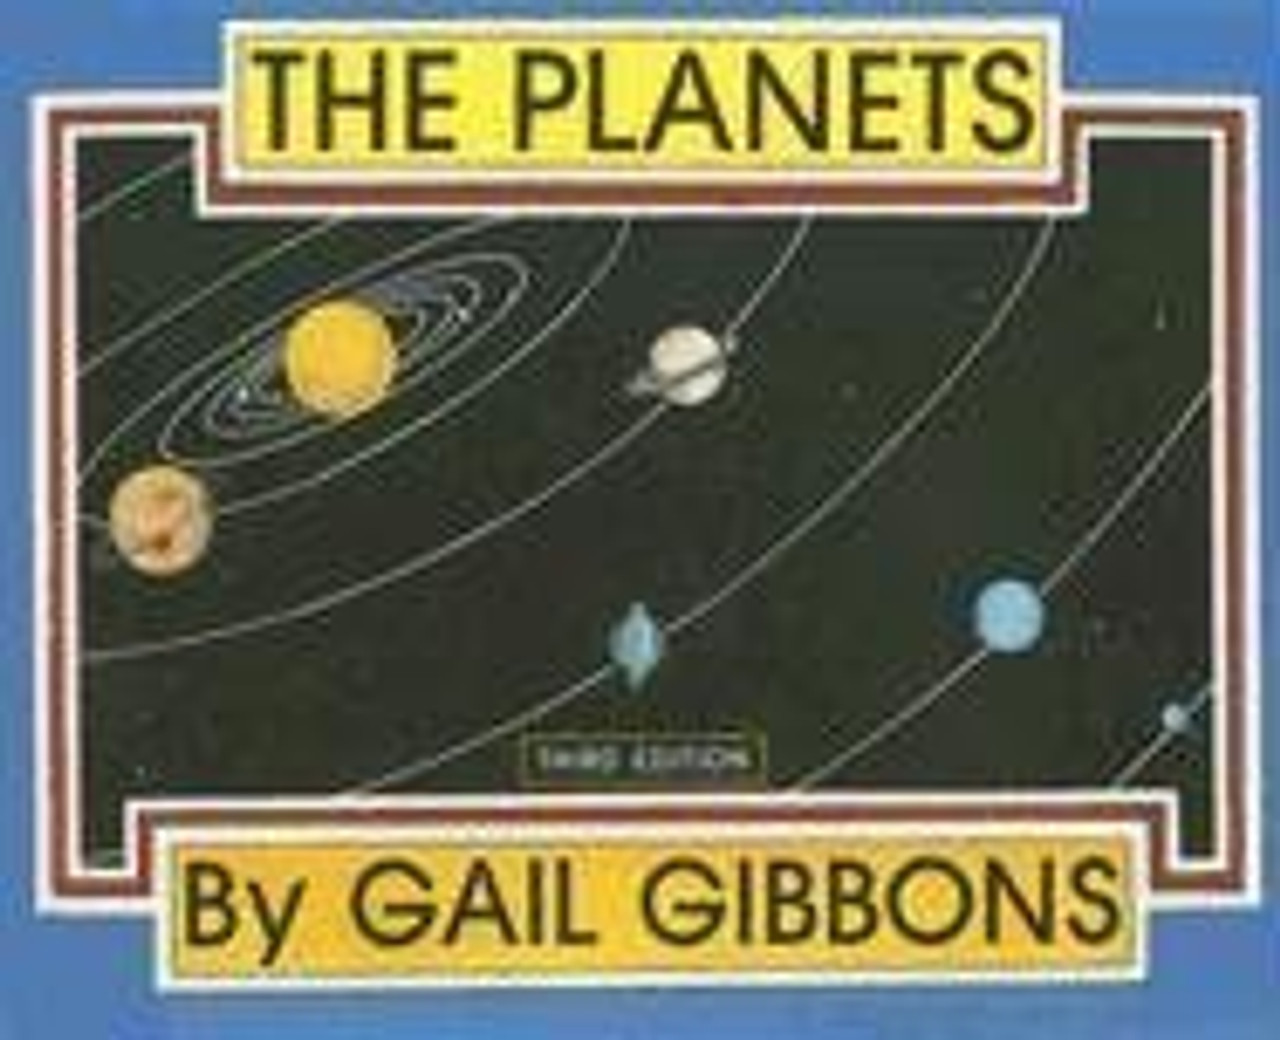 <p>Originally published in 1993, this revised picture book includes exciting new discoveries made since that time, such as the discovery of additional moons orbiting Jupiter and the re-designation of Pluto as a dwarf planet</p>